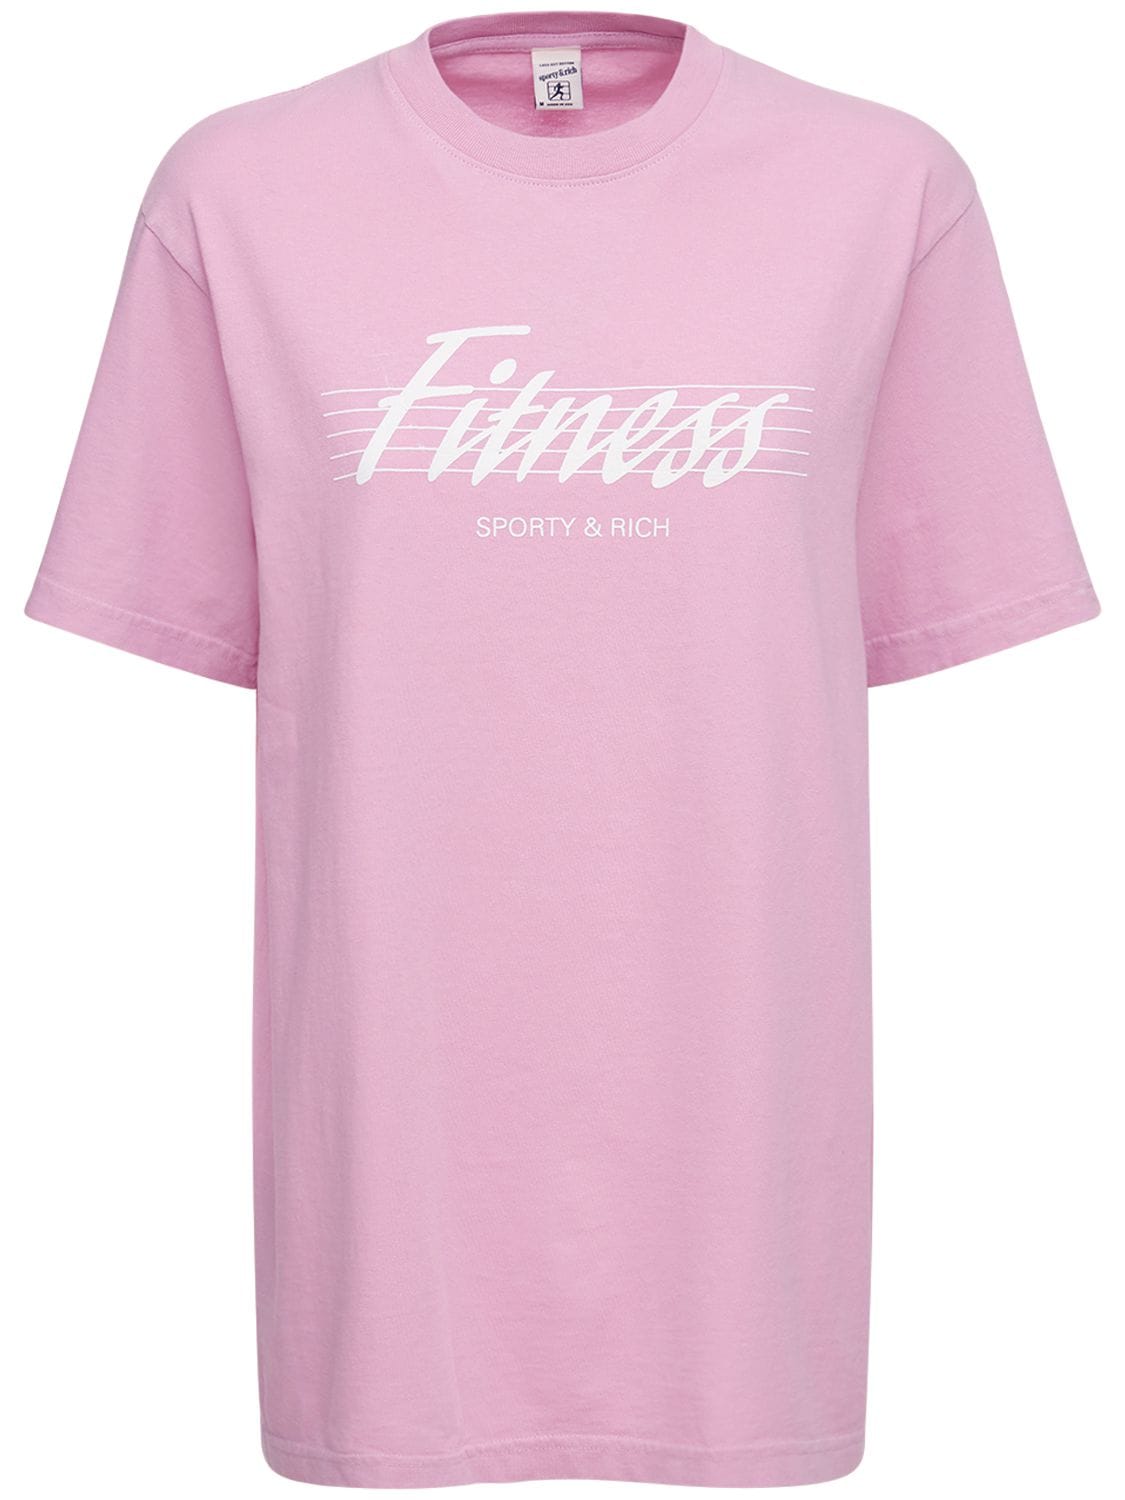 Lvr Exclusive Fitness T-shirt